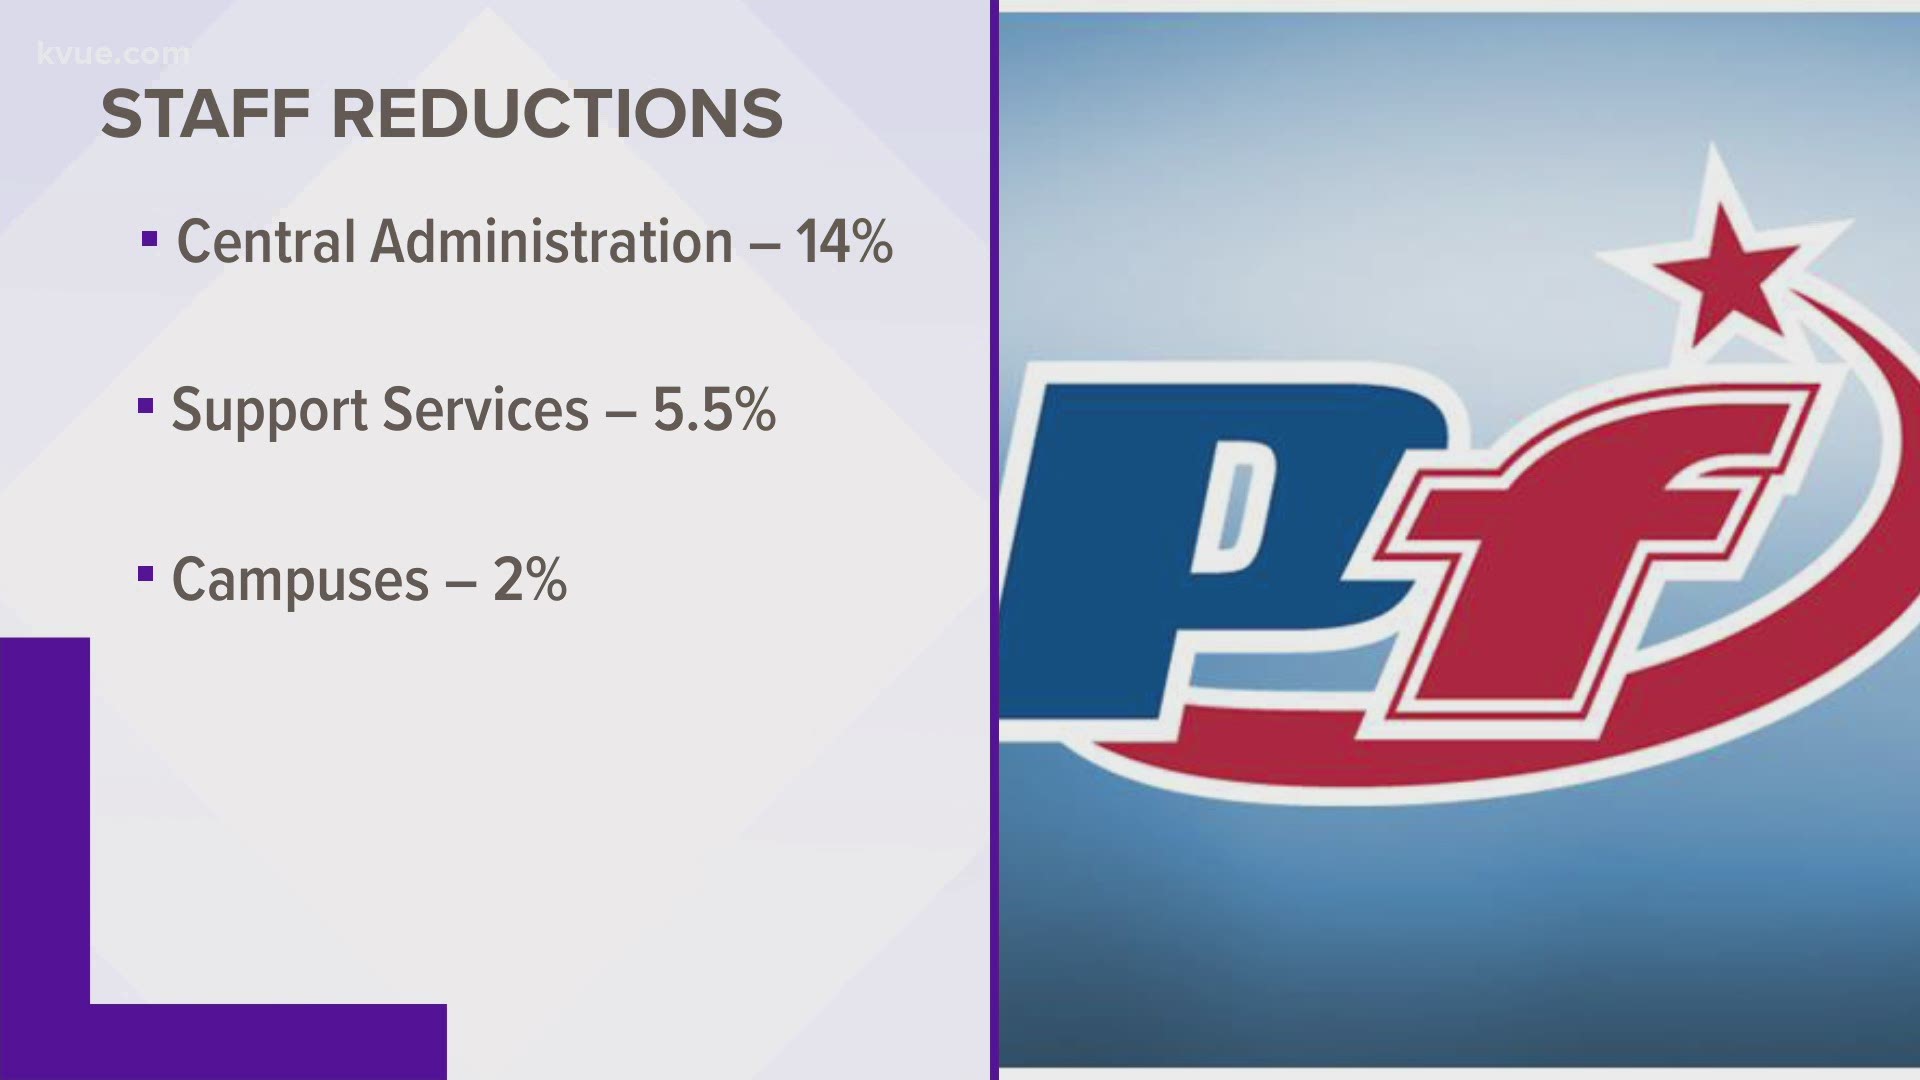 Pflugerville ISD is now cutting positions in order to cut costs.